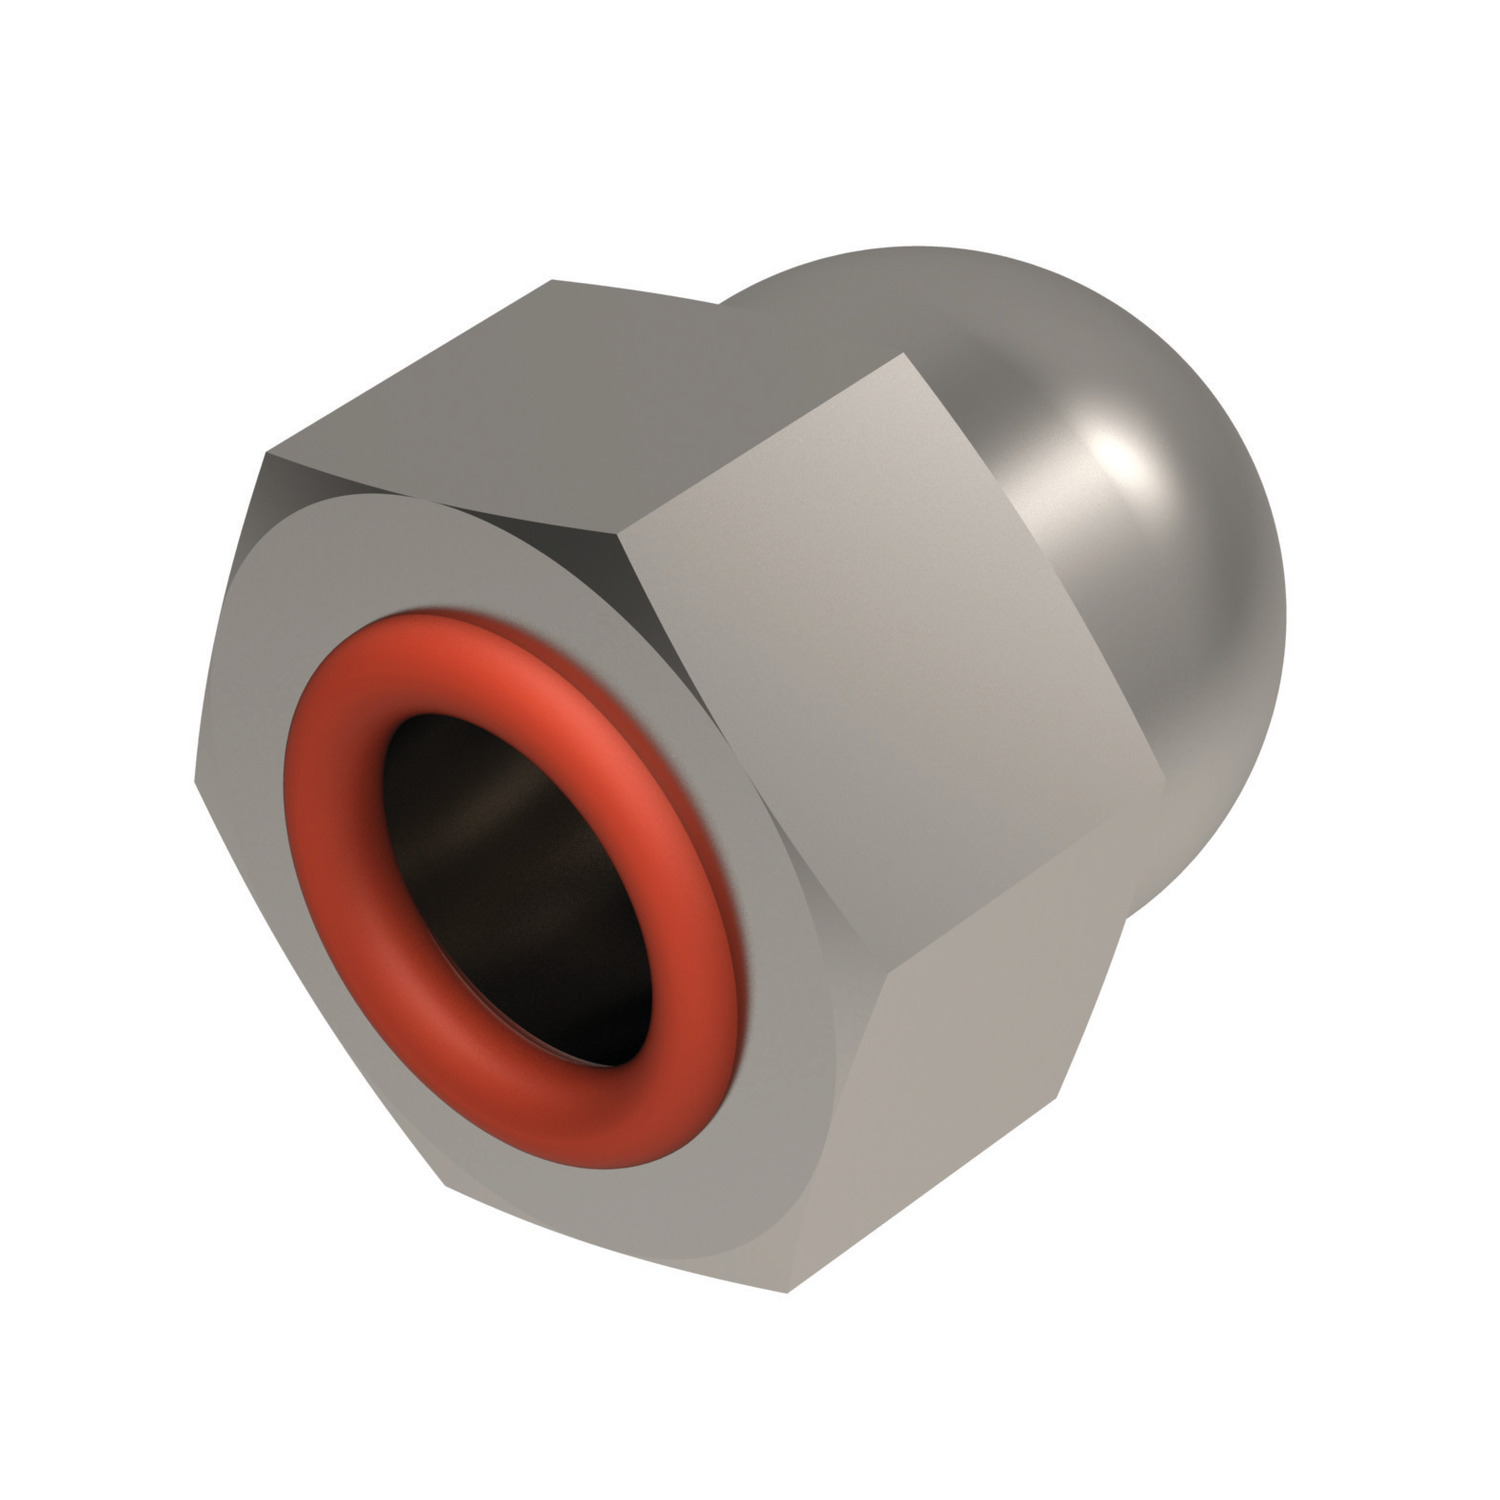 P0179 - Integral Seal Domed Nuts